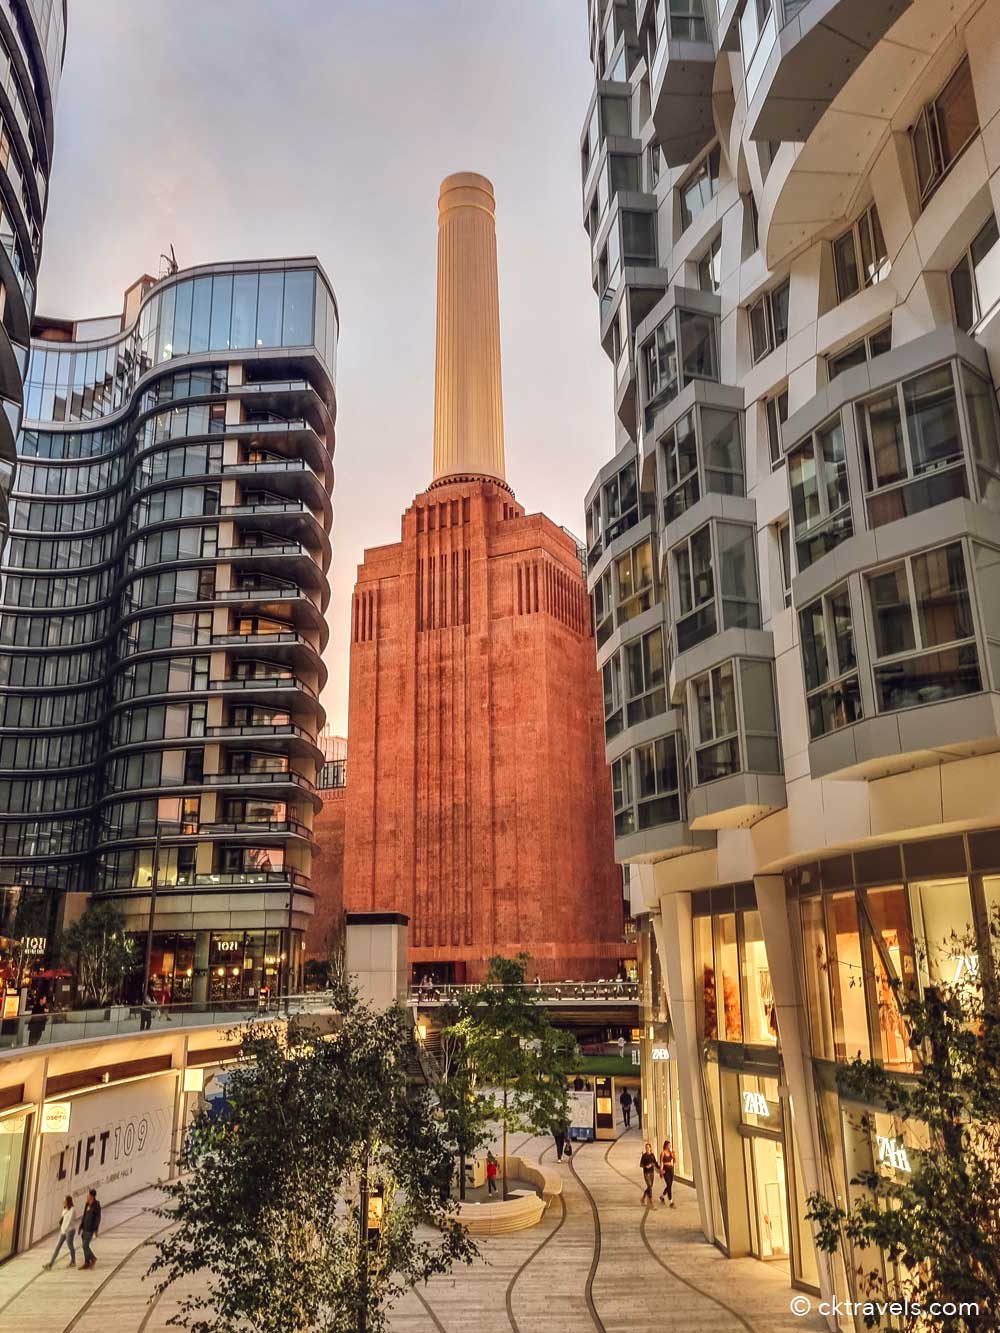 Battersea Power Station Shopping Centre / Mall London